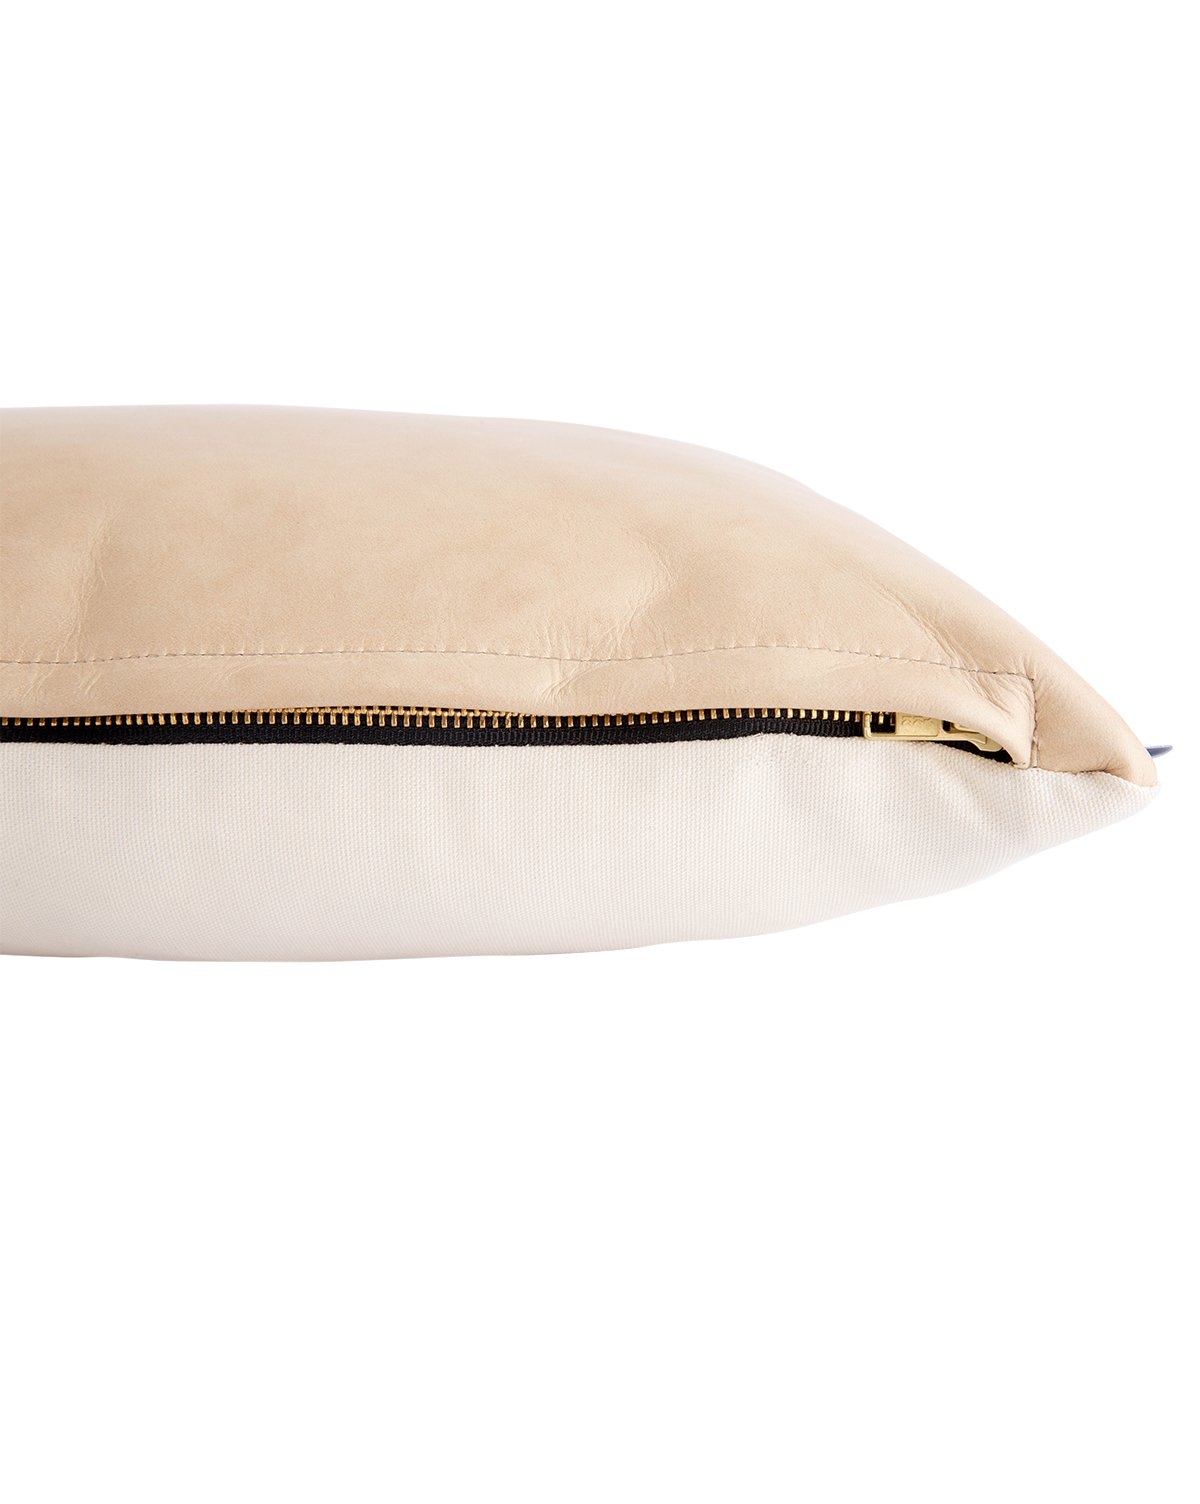 PALOMINO LEATHER PILLOW COVER WITH DOWN INSERT, 14" x 20" - Image 2